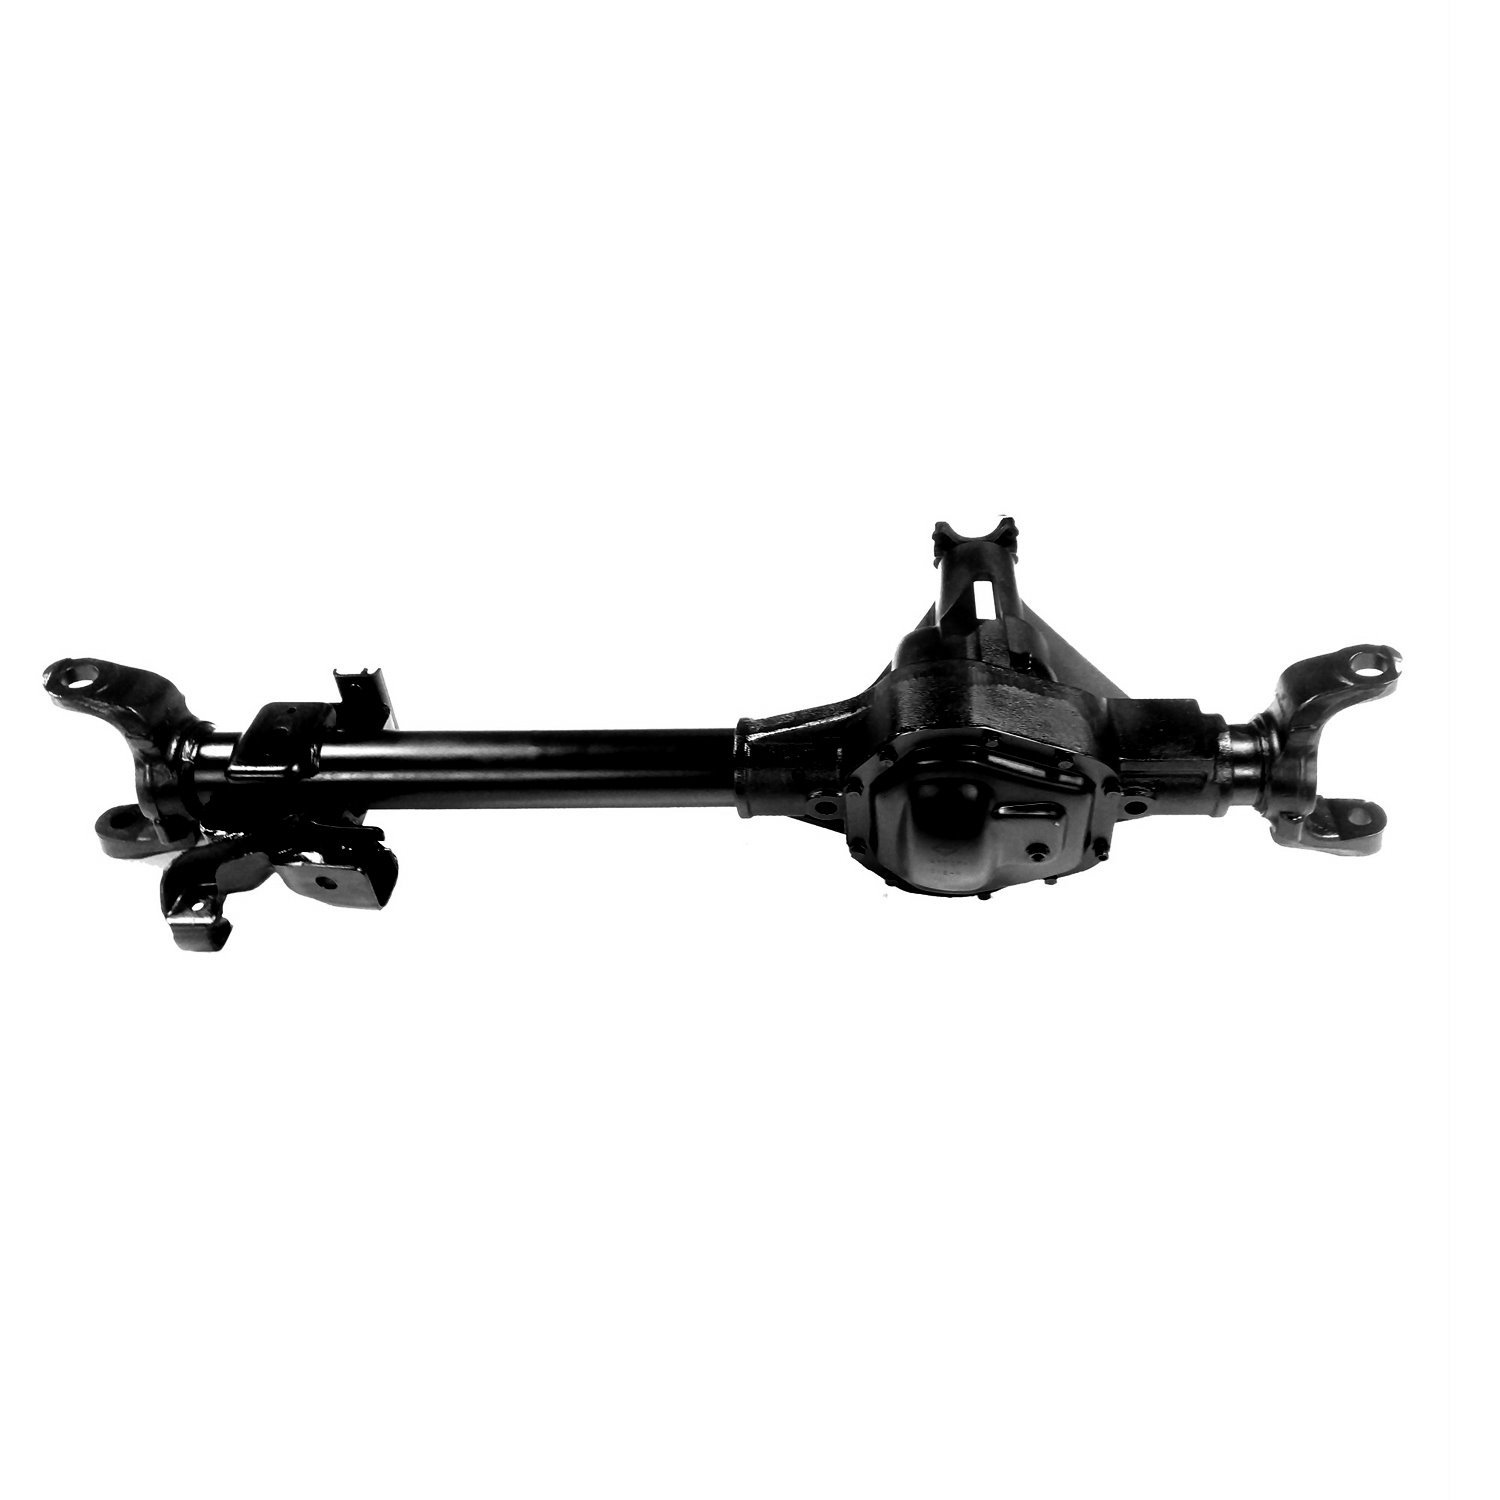 Remanufactured Complete Axle Assembly for Dana 60 01-04 F350 4.11 , DRW with 4 Wheel ABS